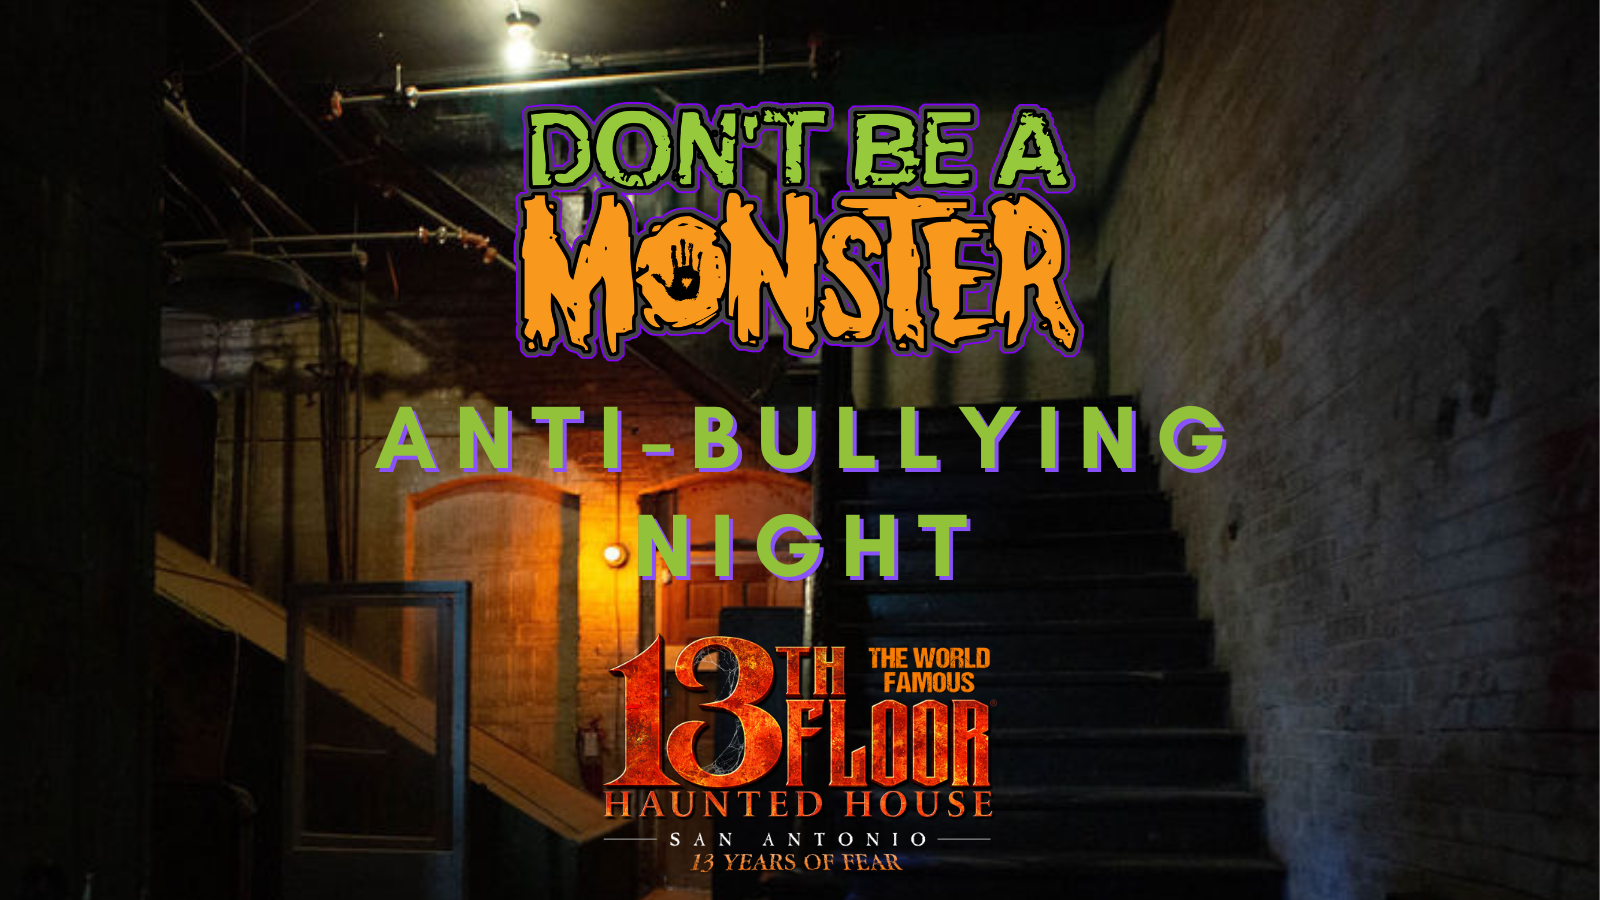 13th Floor Haunted House To Host Anti